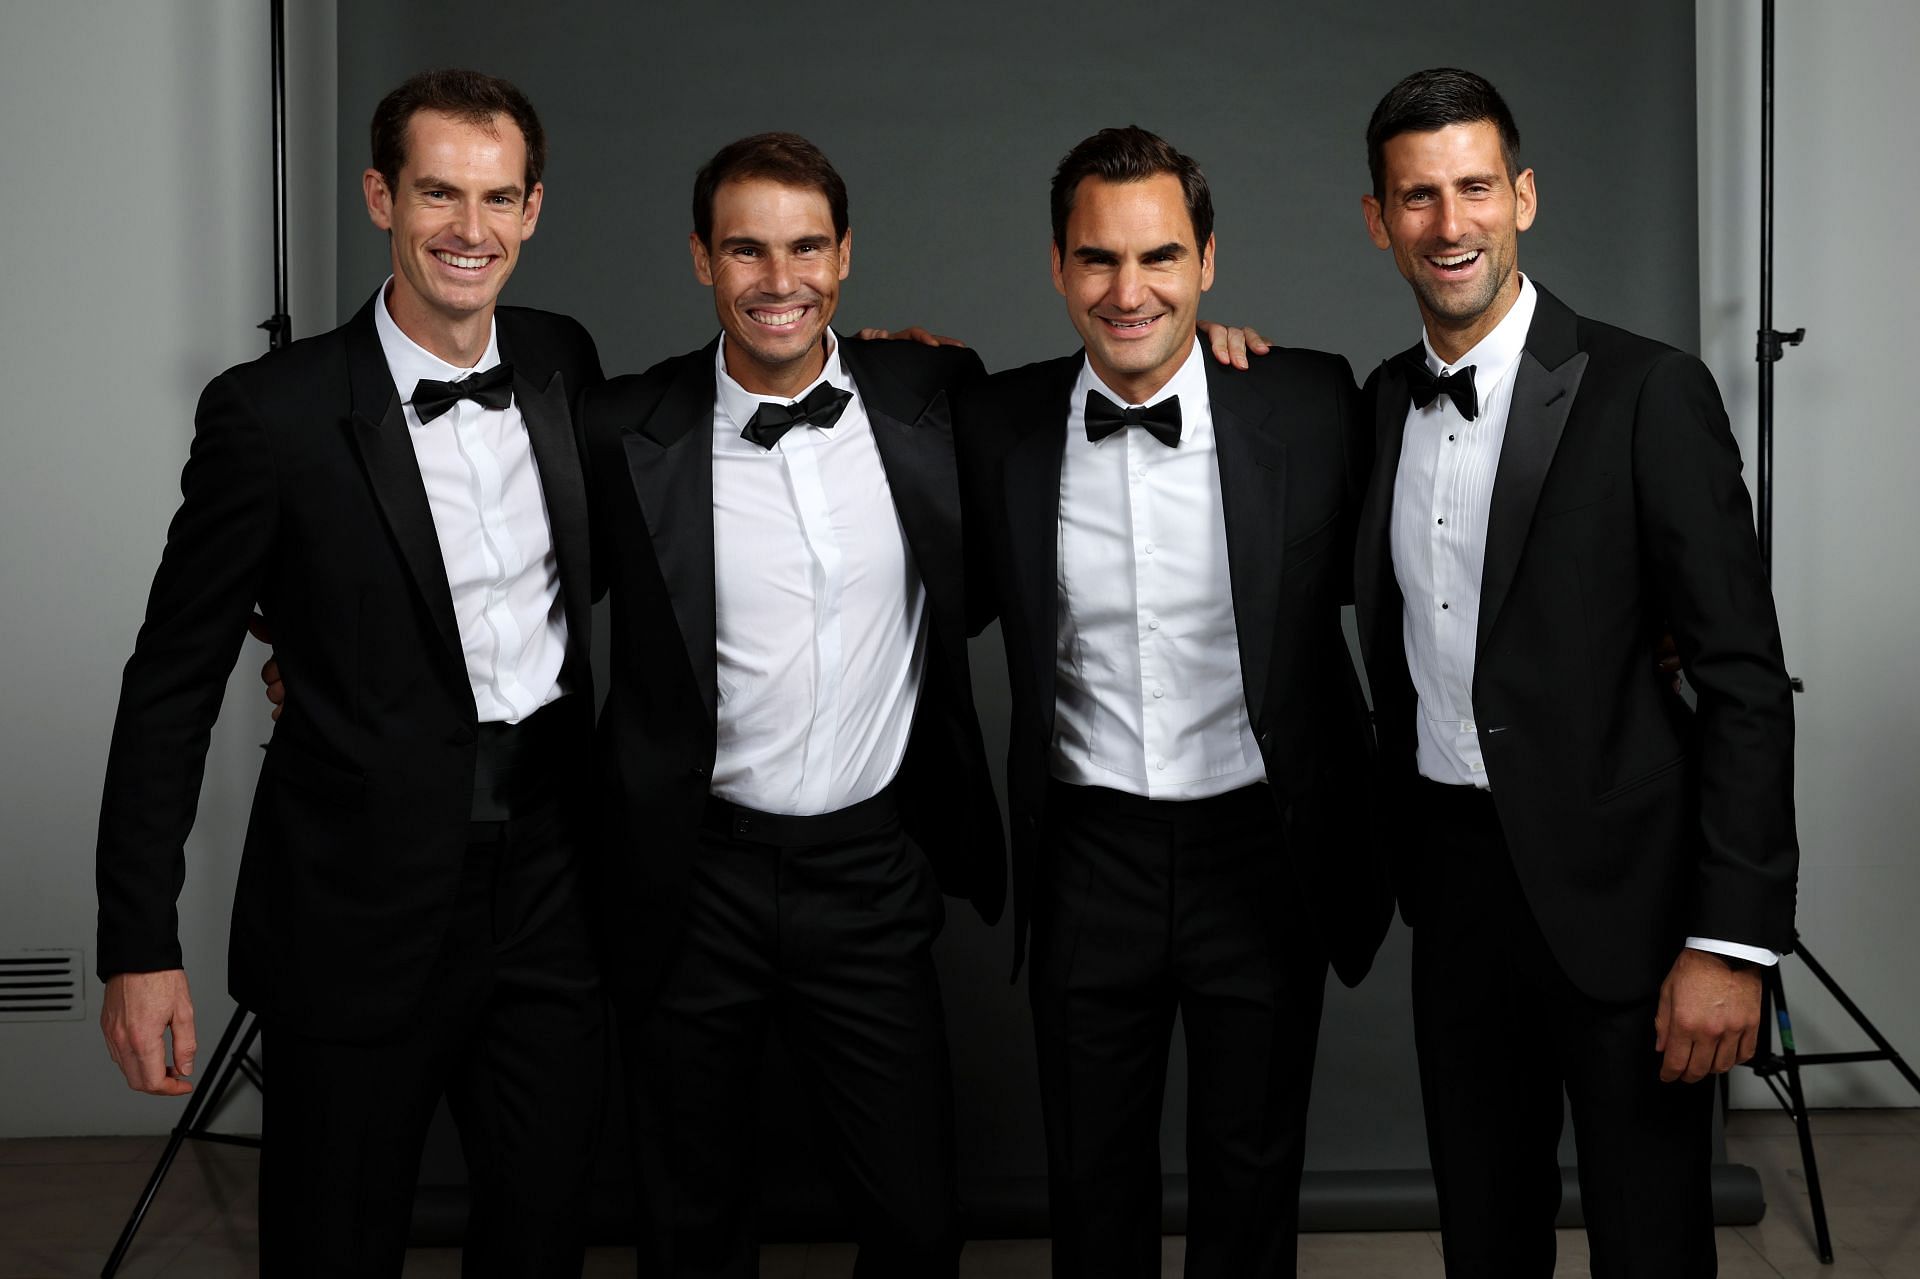 The quartet of Andy Murray, Rafael Nadal, Roger Federer, and Novak Djokovic is also widely called &quot;Big 4&quot;